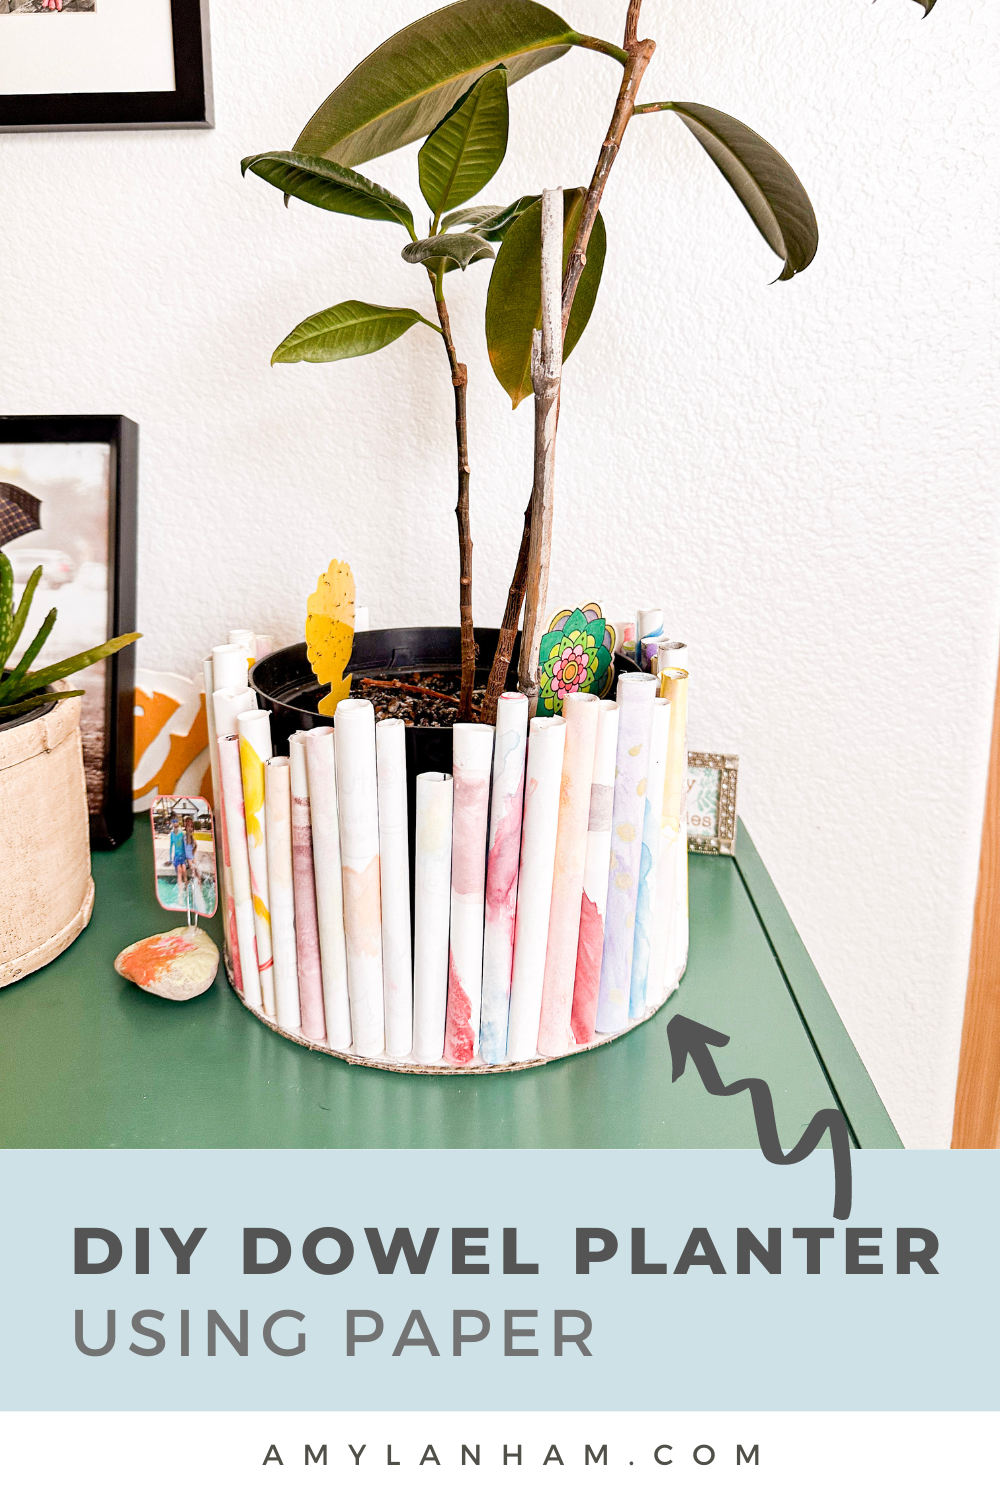 Dowel planter with watercolor paper